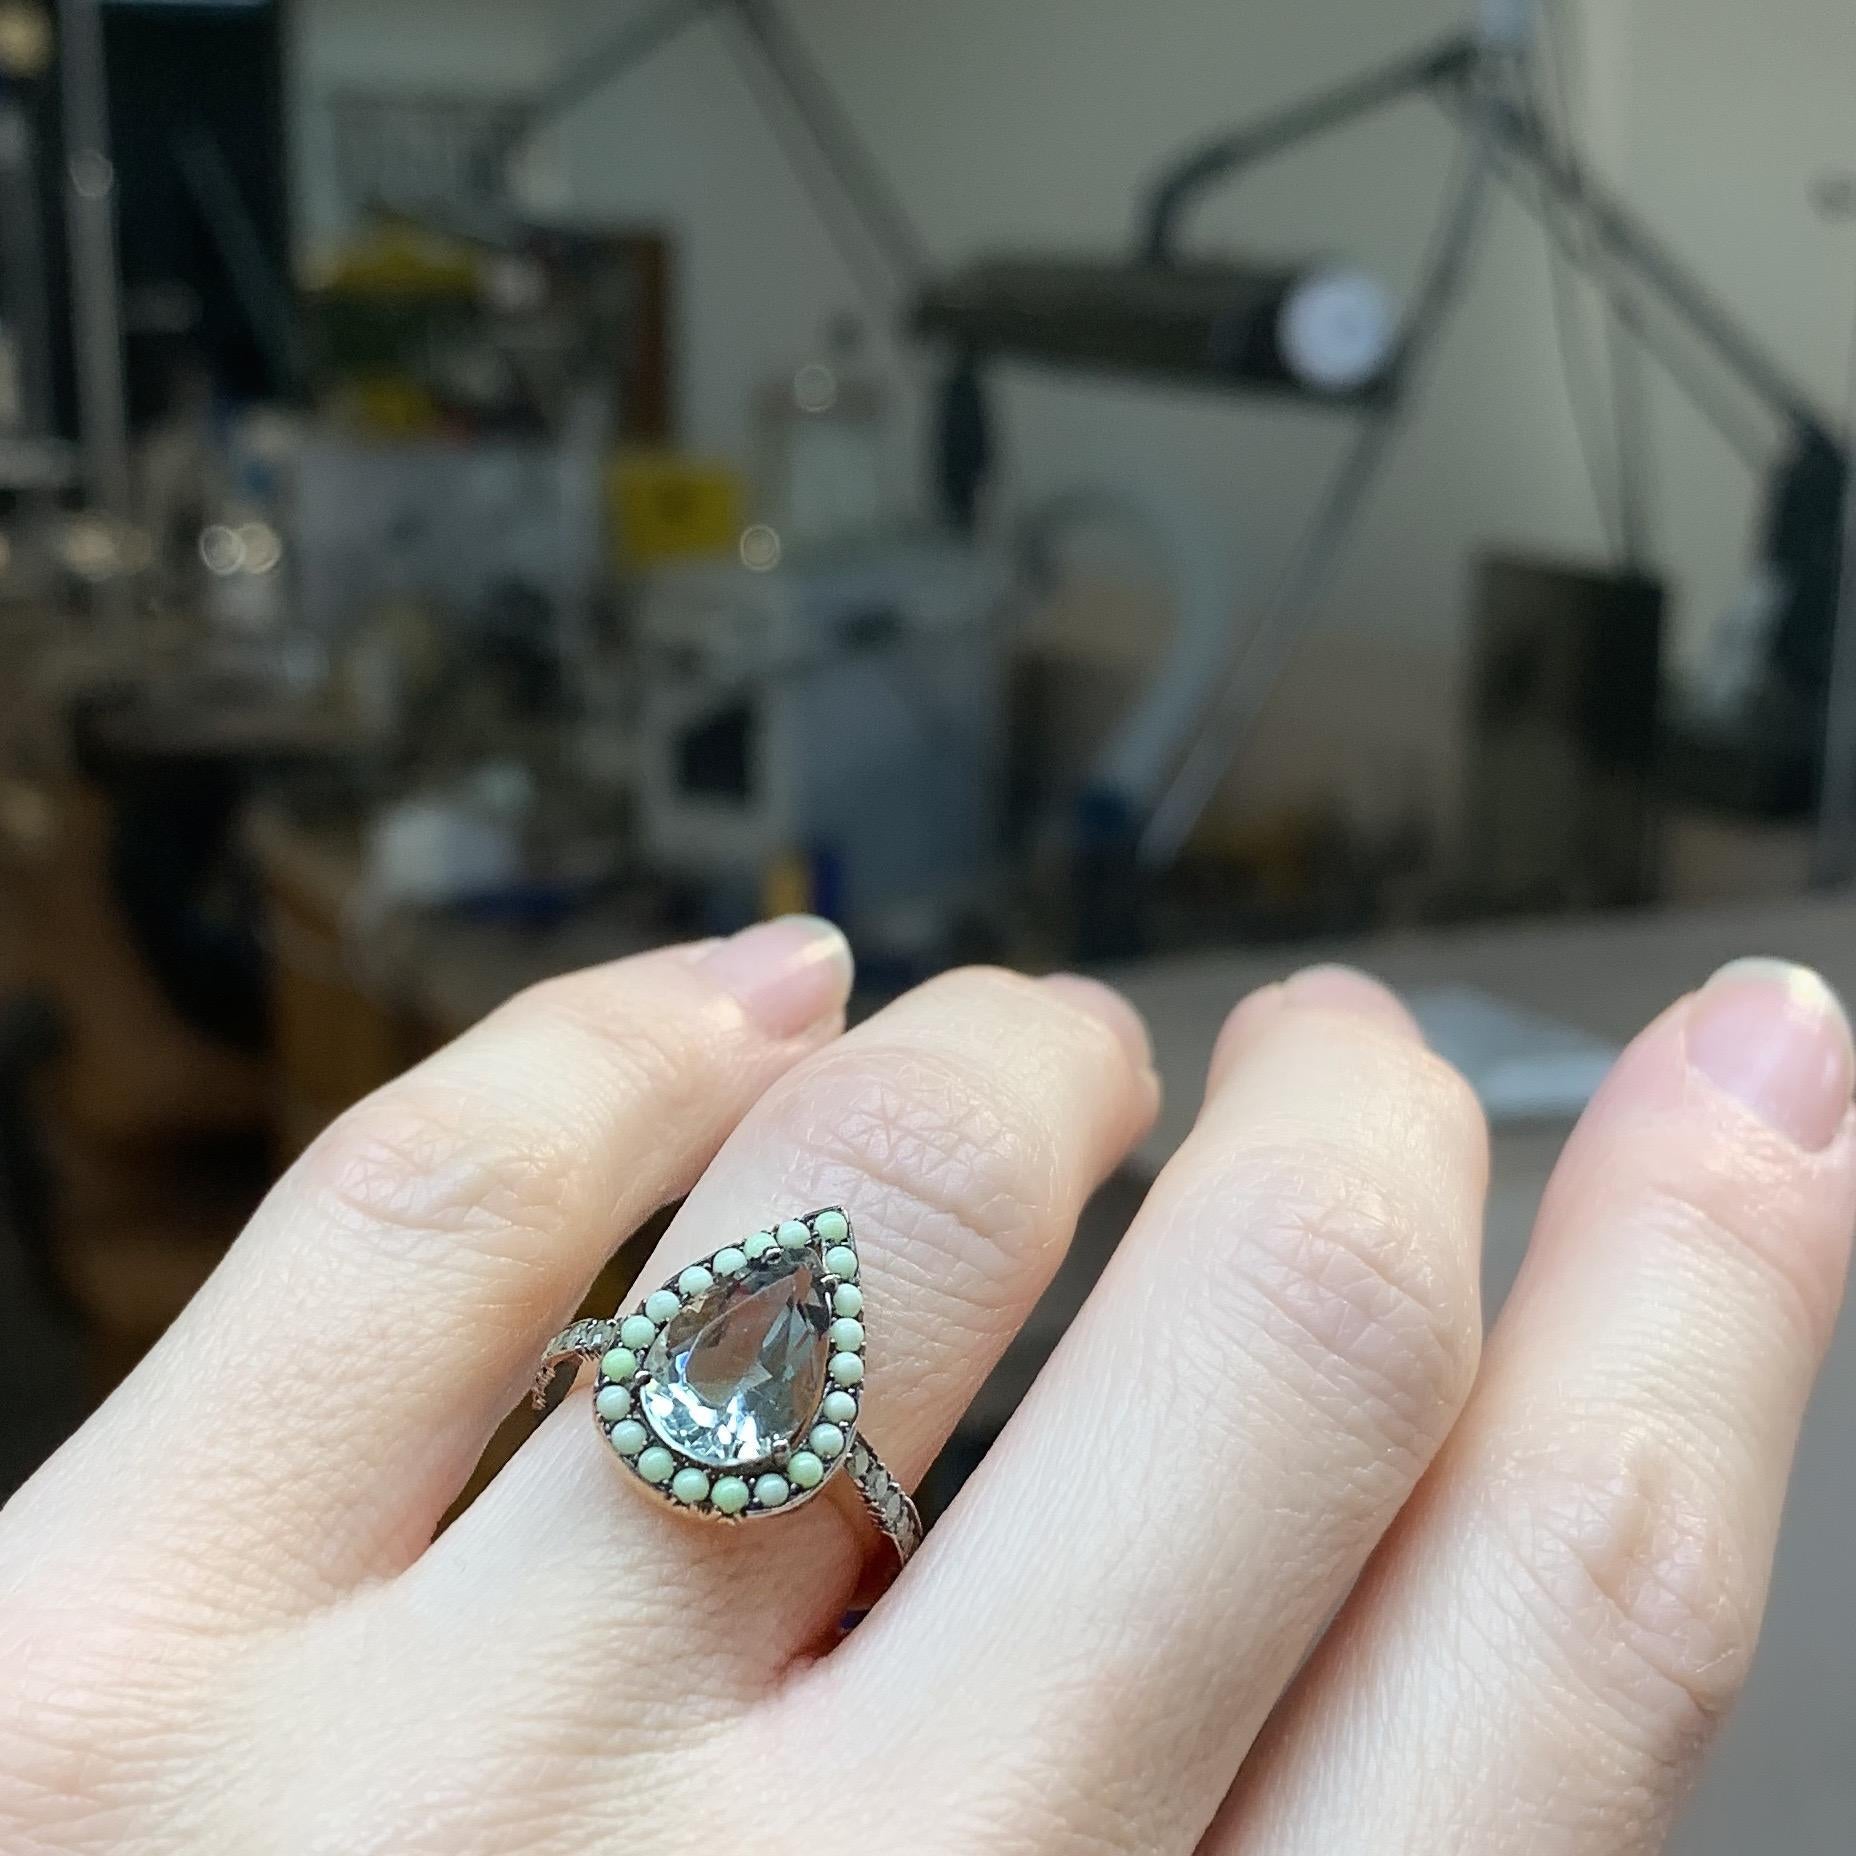 One of a kind ring in 18K Rose gold 5,9 g set with a pear shaped Prasiolite centerstone, Fancy yellow icy diamonds 0,18 ct. & Pave & Castle set Lemon Chrysophrase cabochons. The stonesetting is black rodium plated. Handmade the traditional way.